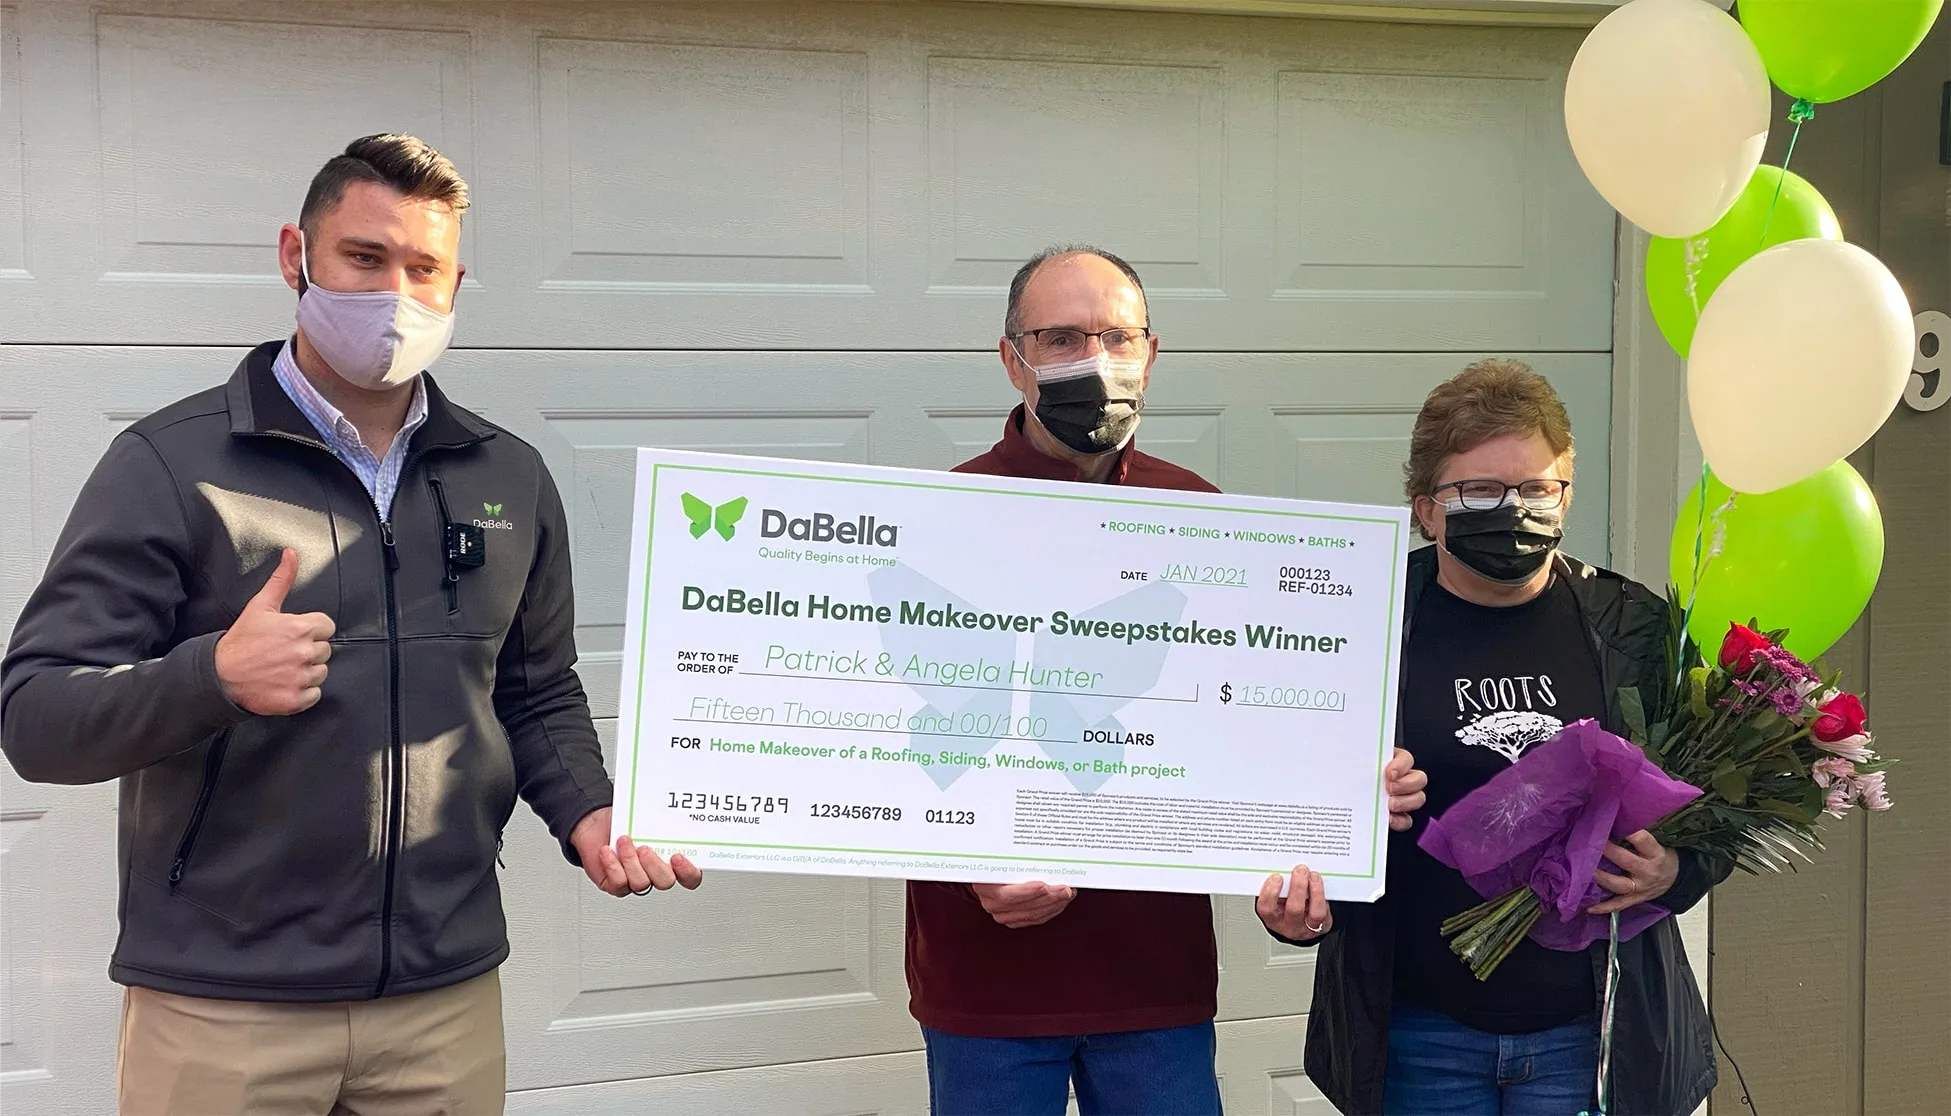 The hunter family receiving the DaBella sweepstakes